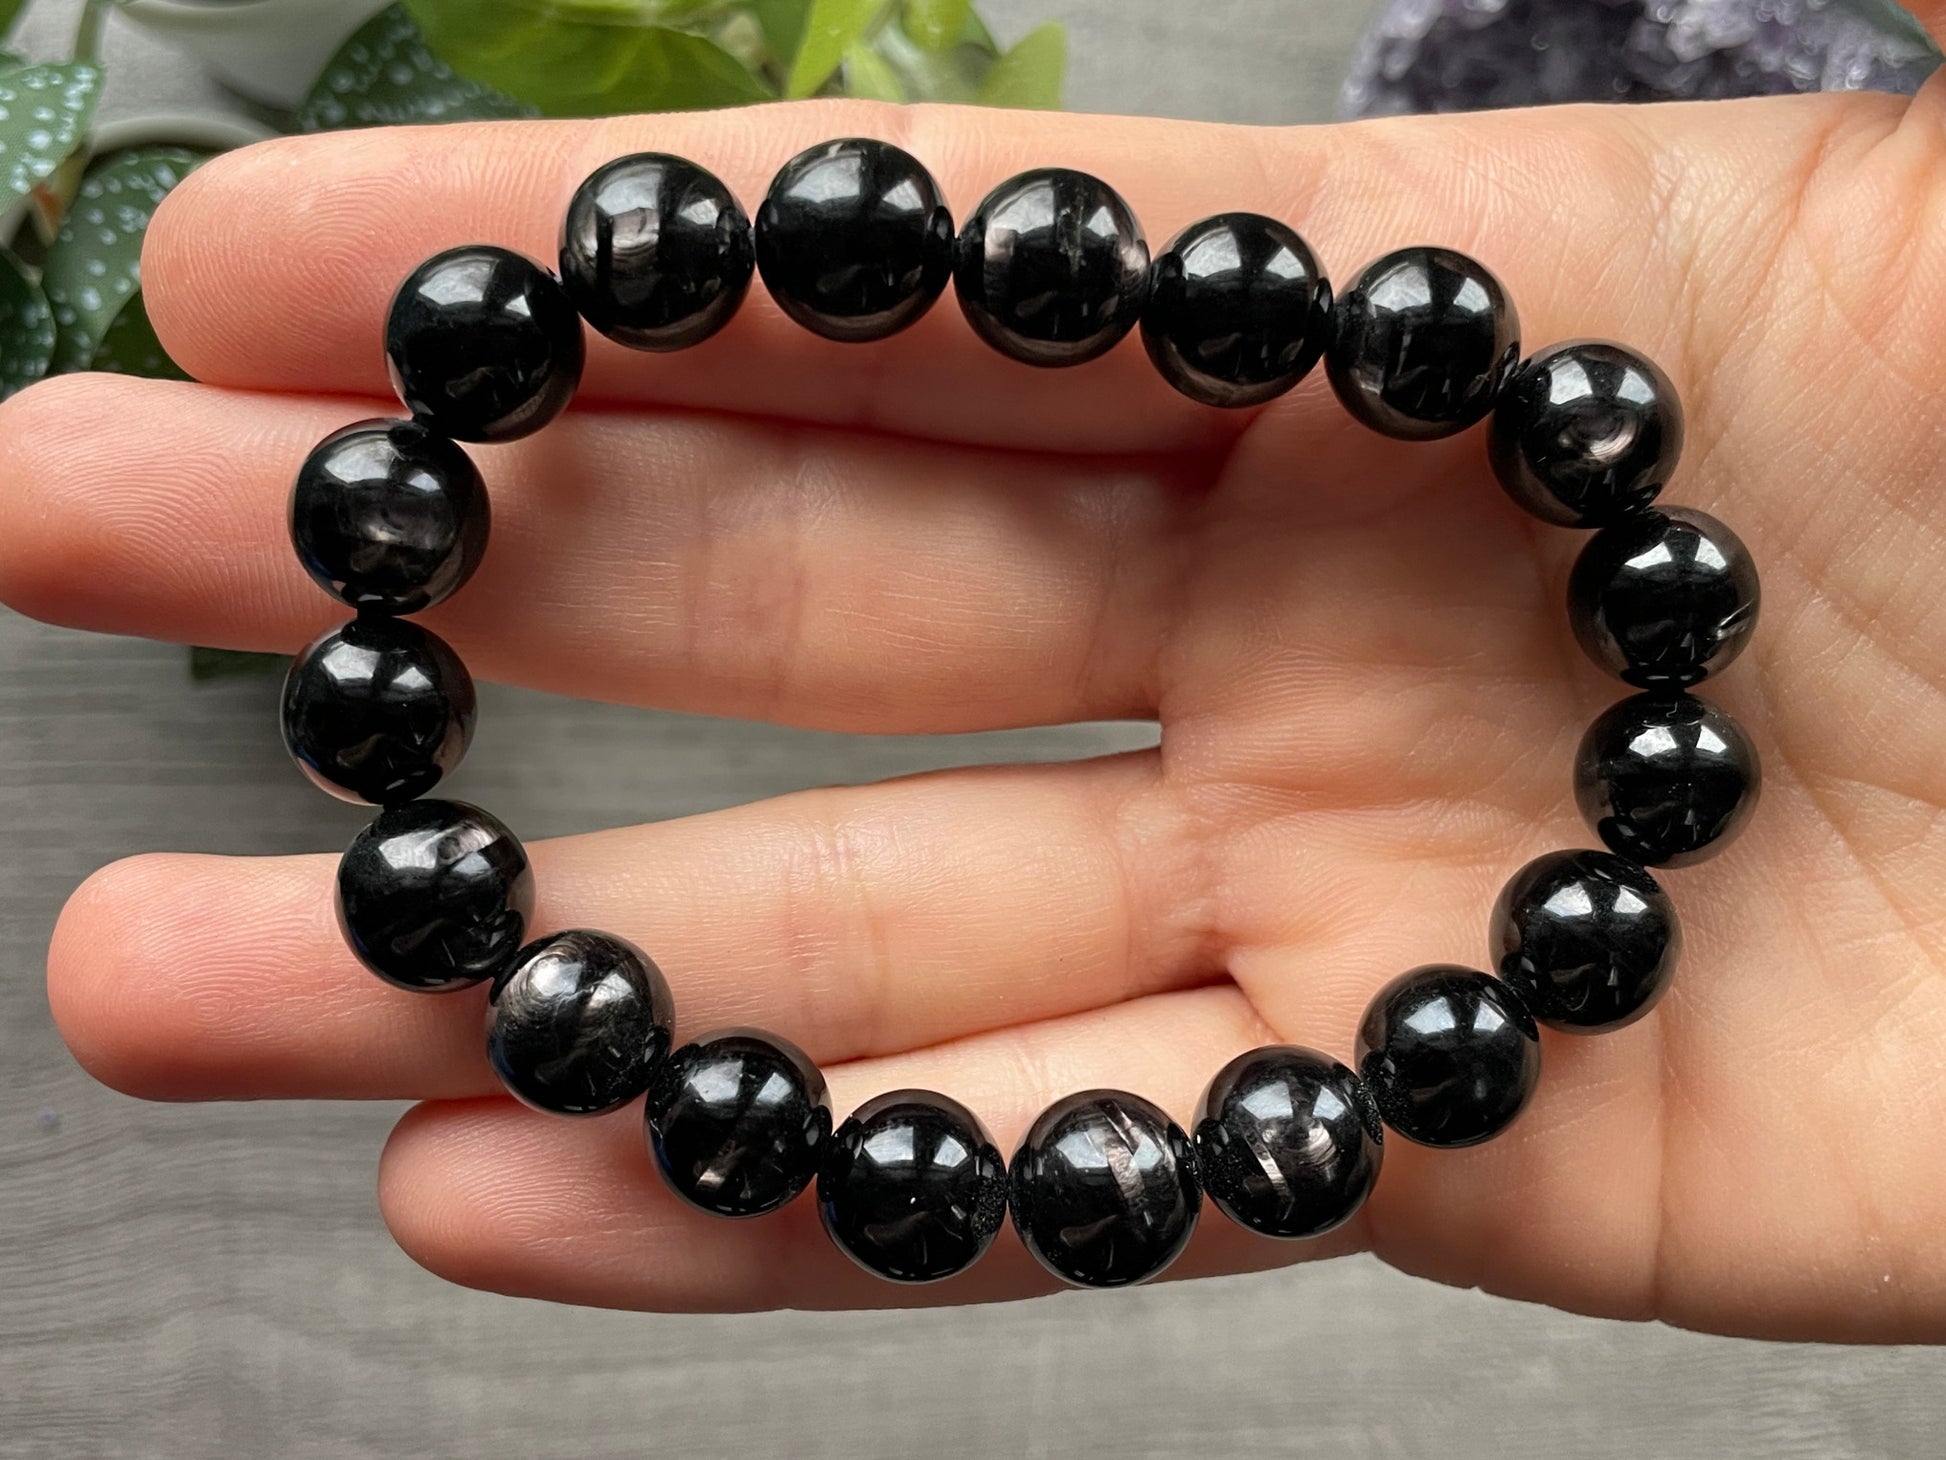 Pictured is a hypersthene bead bracelet.